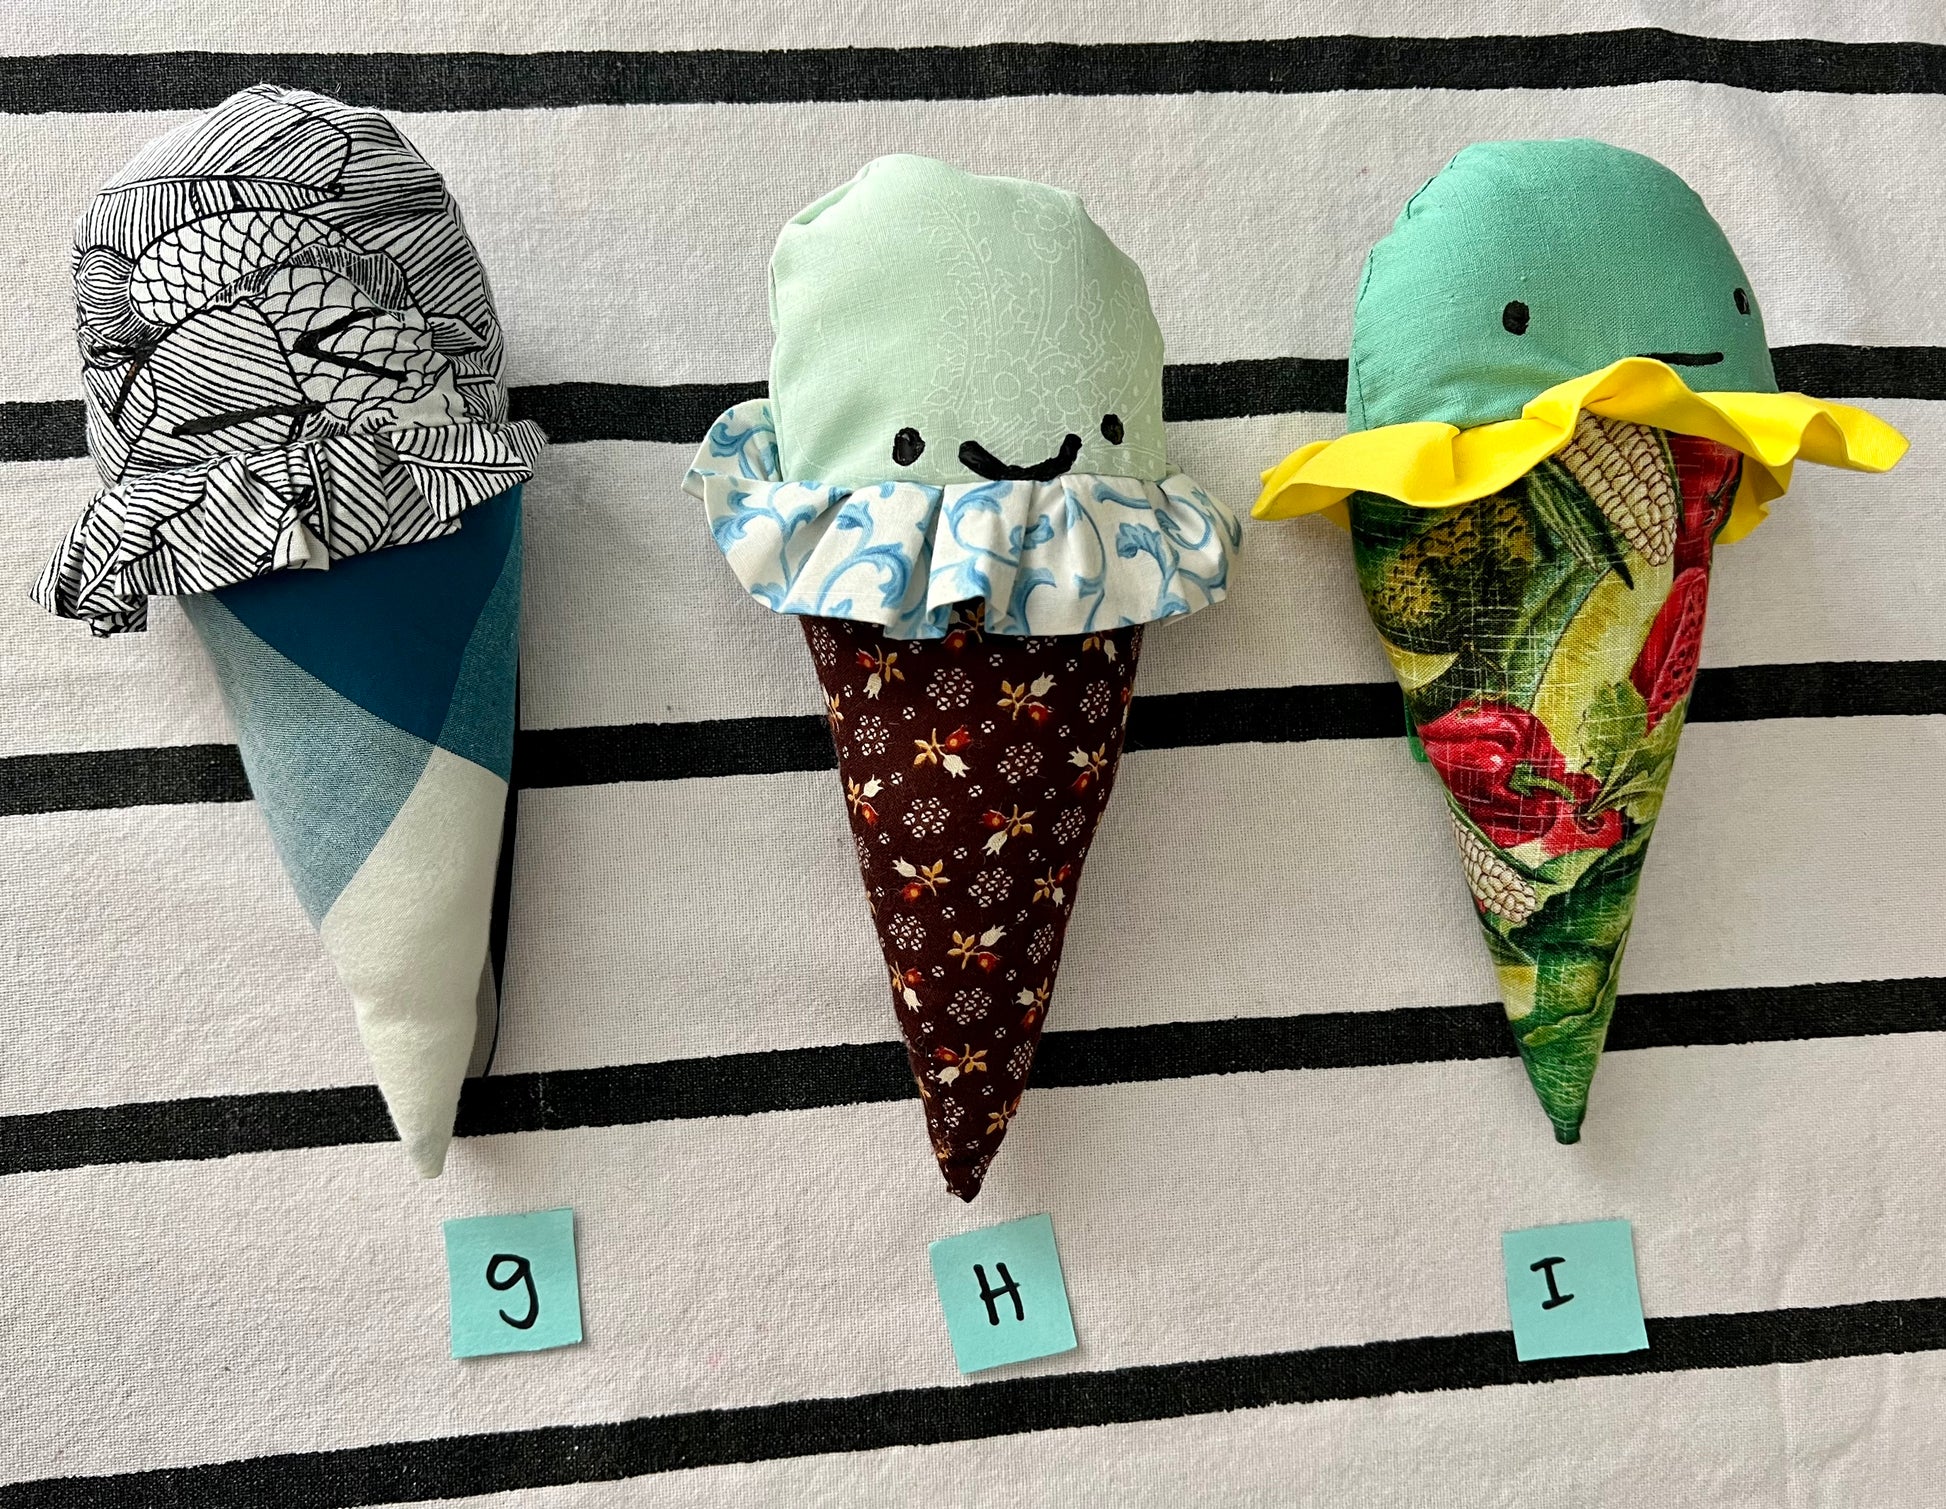 Ice cream cone plushies with handpainted faces, lined up with the letters G H I below them